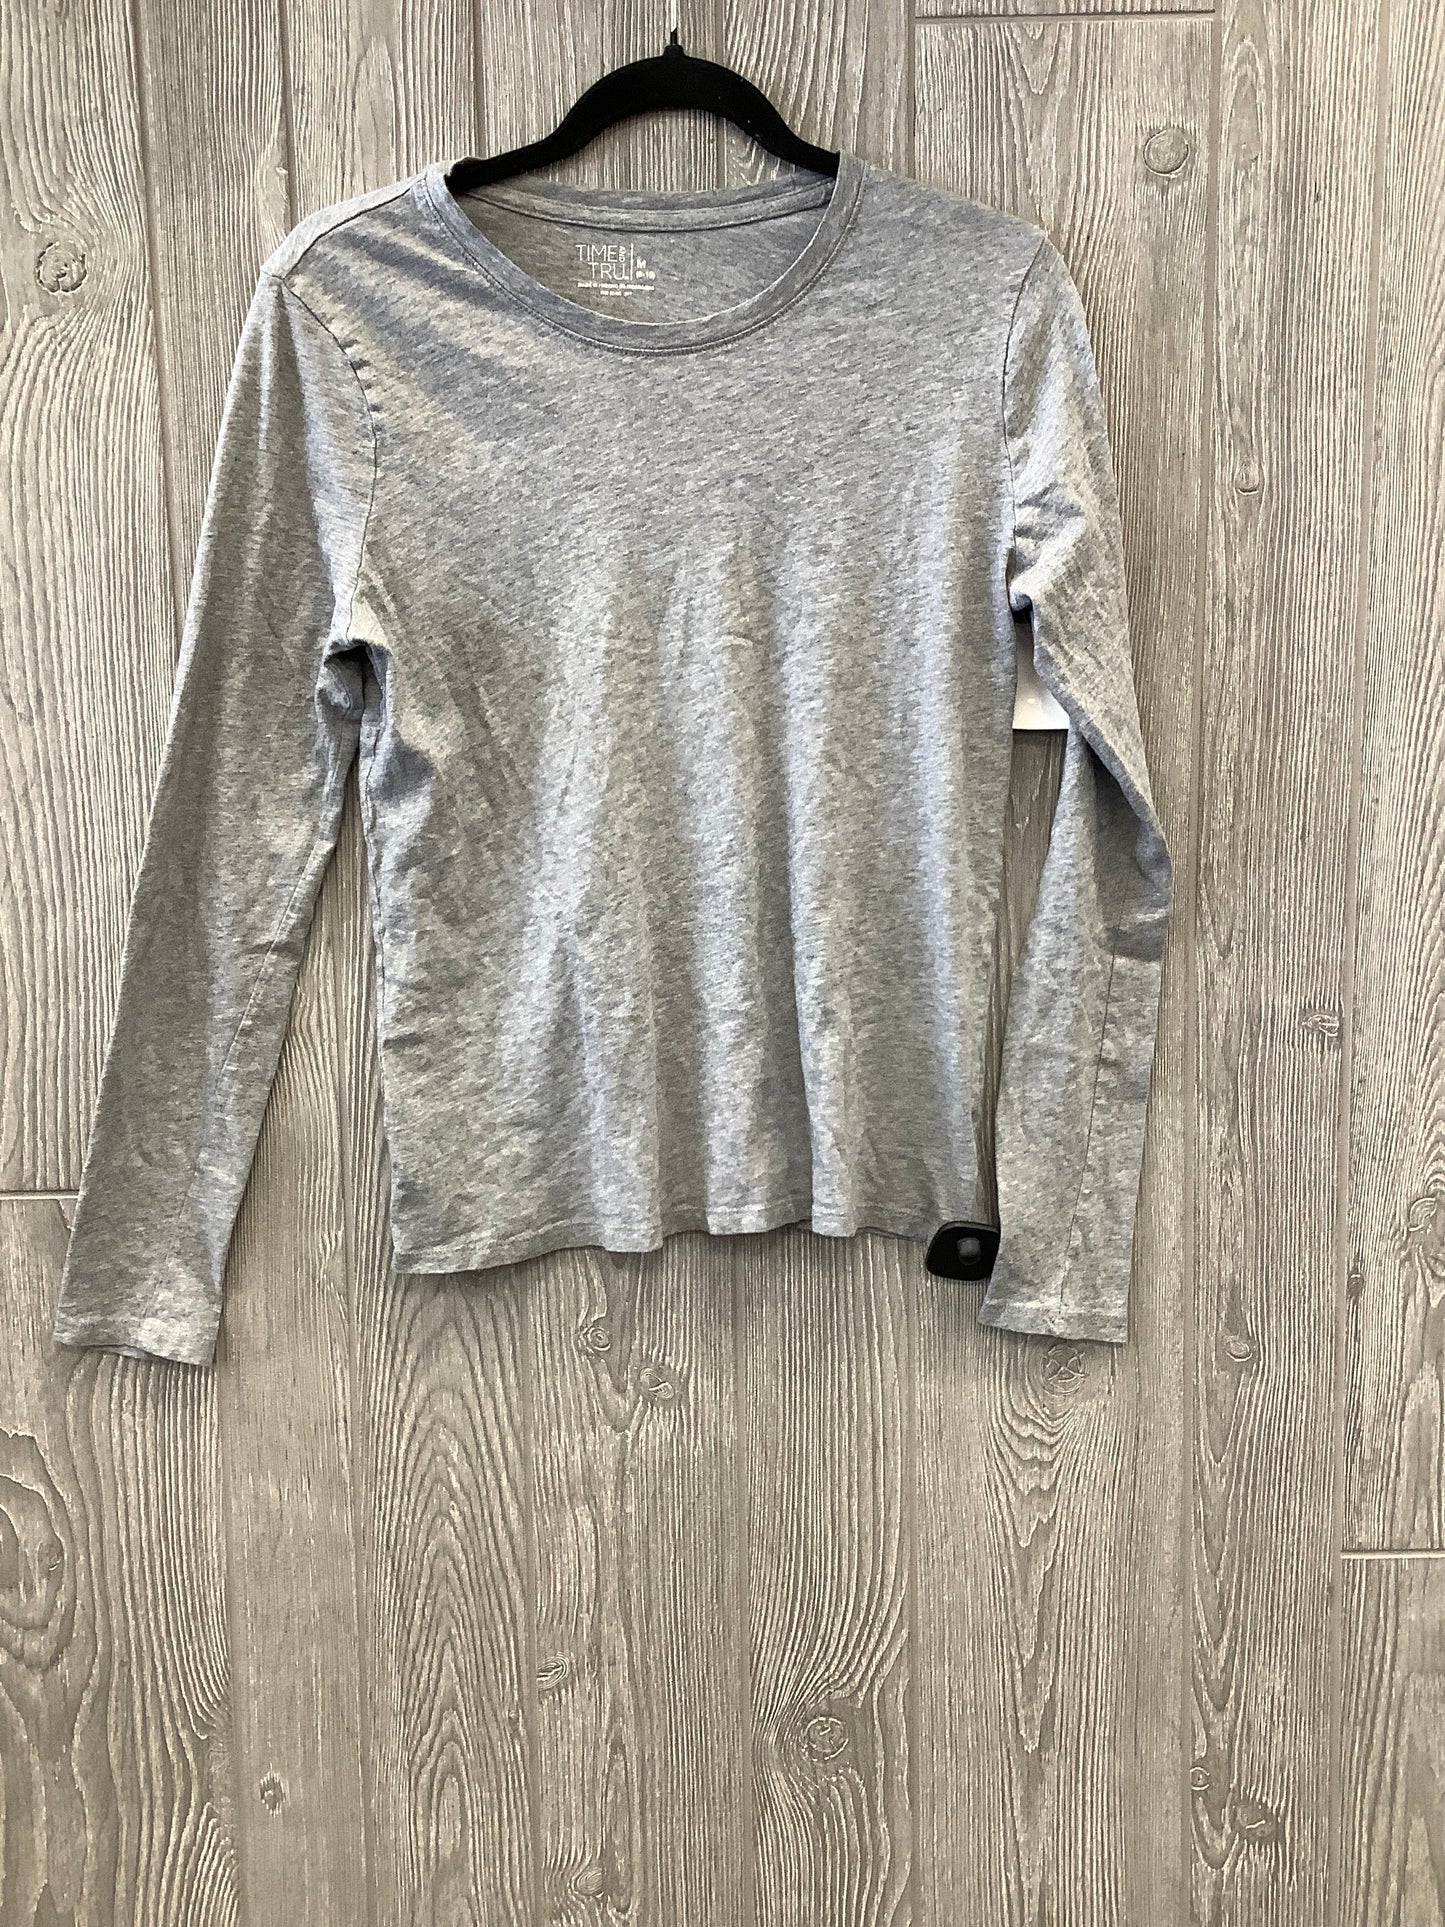 Grey Top Long Sleeve Time And Tru, Size M